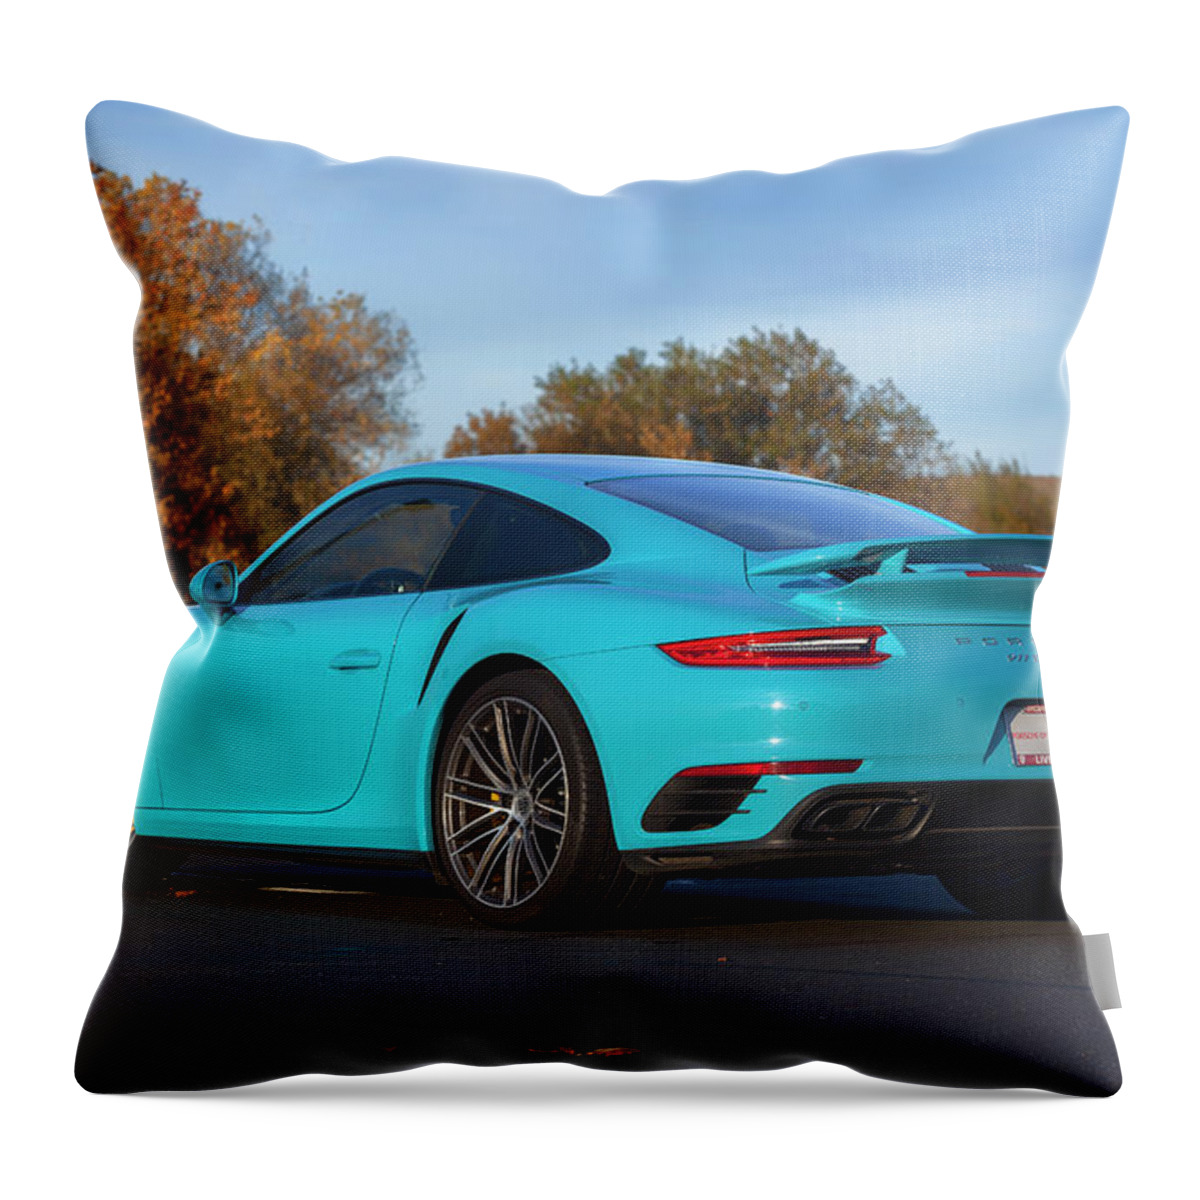 Cars Throw Pillow featuring the photograph #Miami #Blue #Porsche 911 #Turbo S #Print by ItzKirb Photography